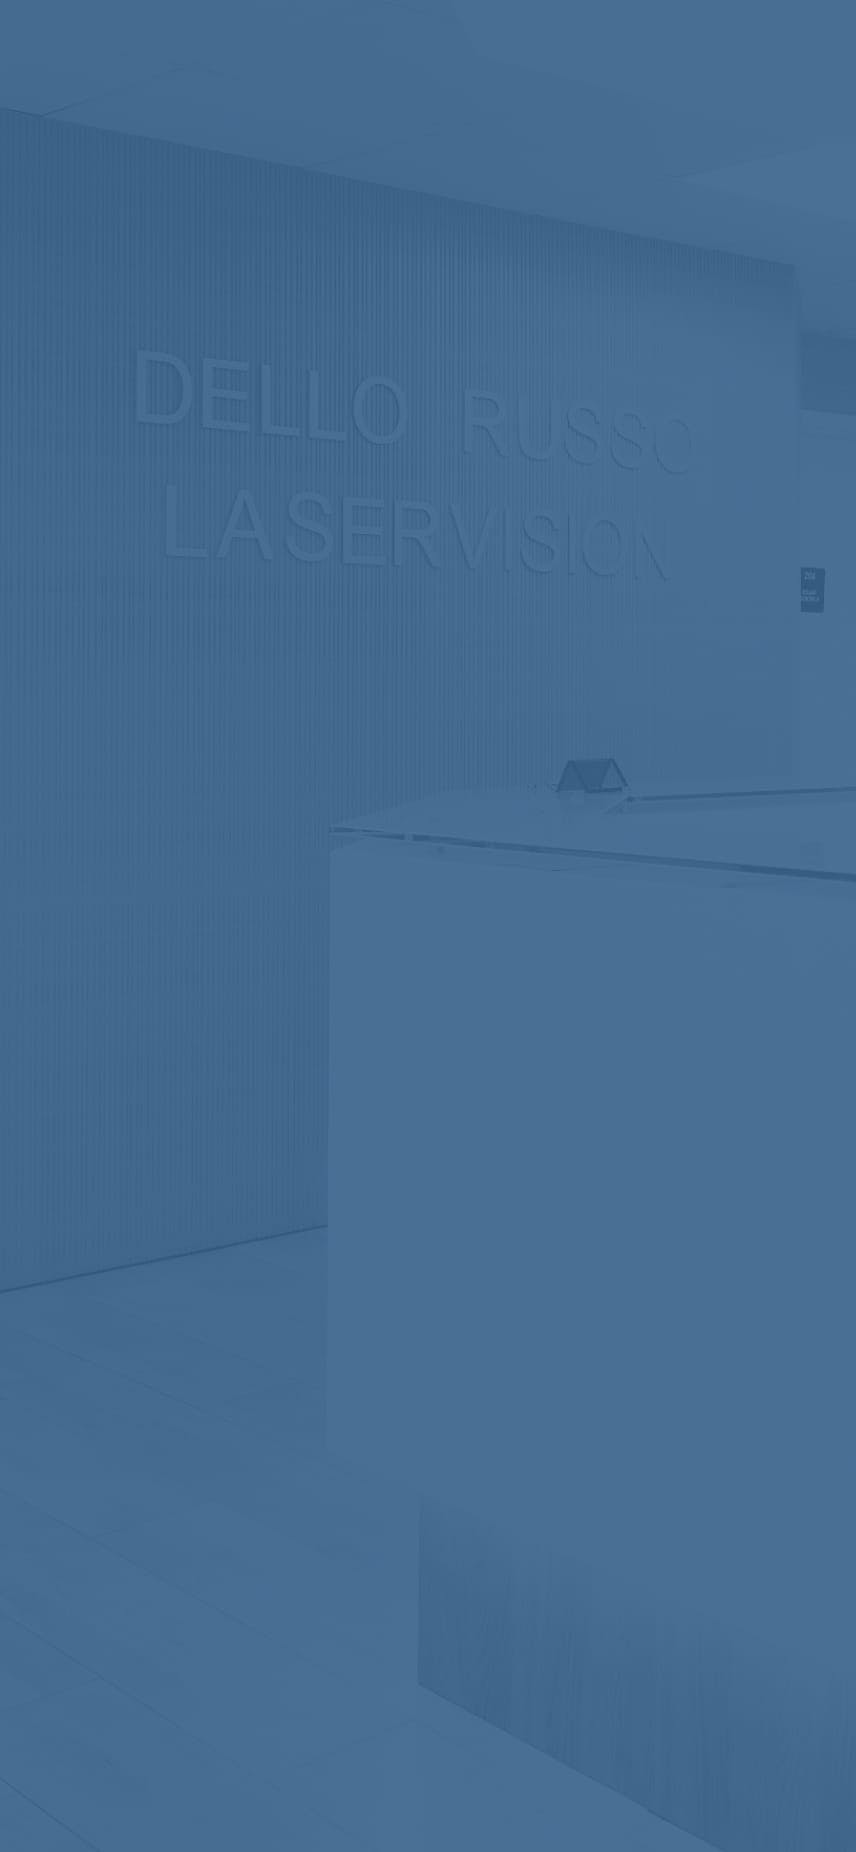 Dello Russo Laser Vision office with a blue overlay